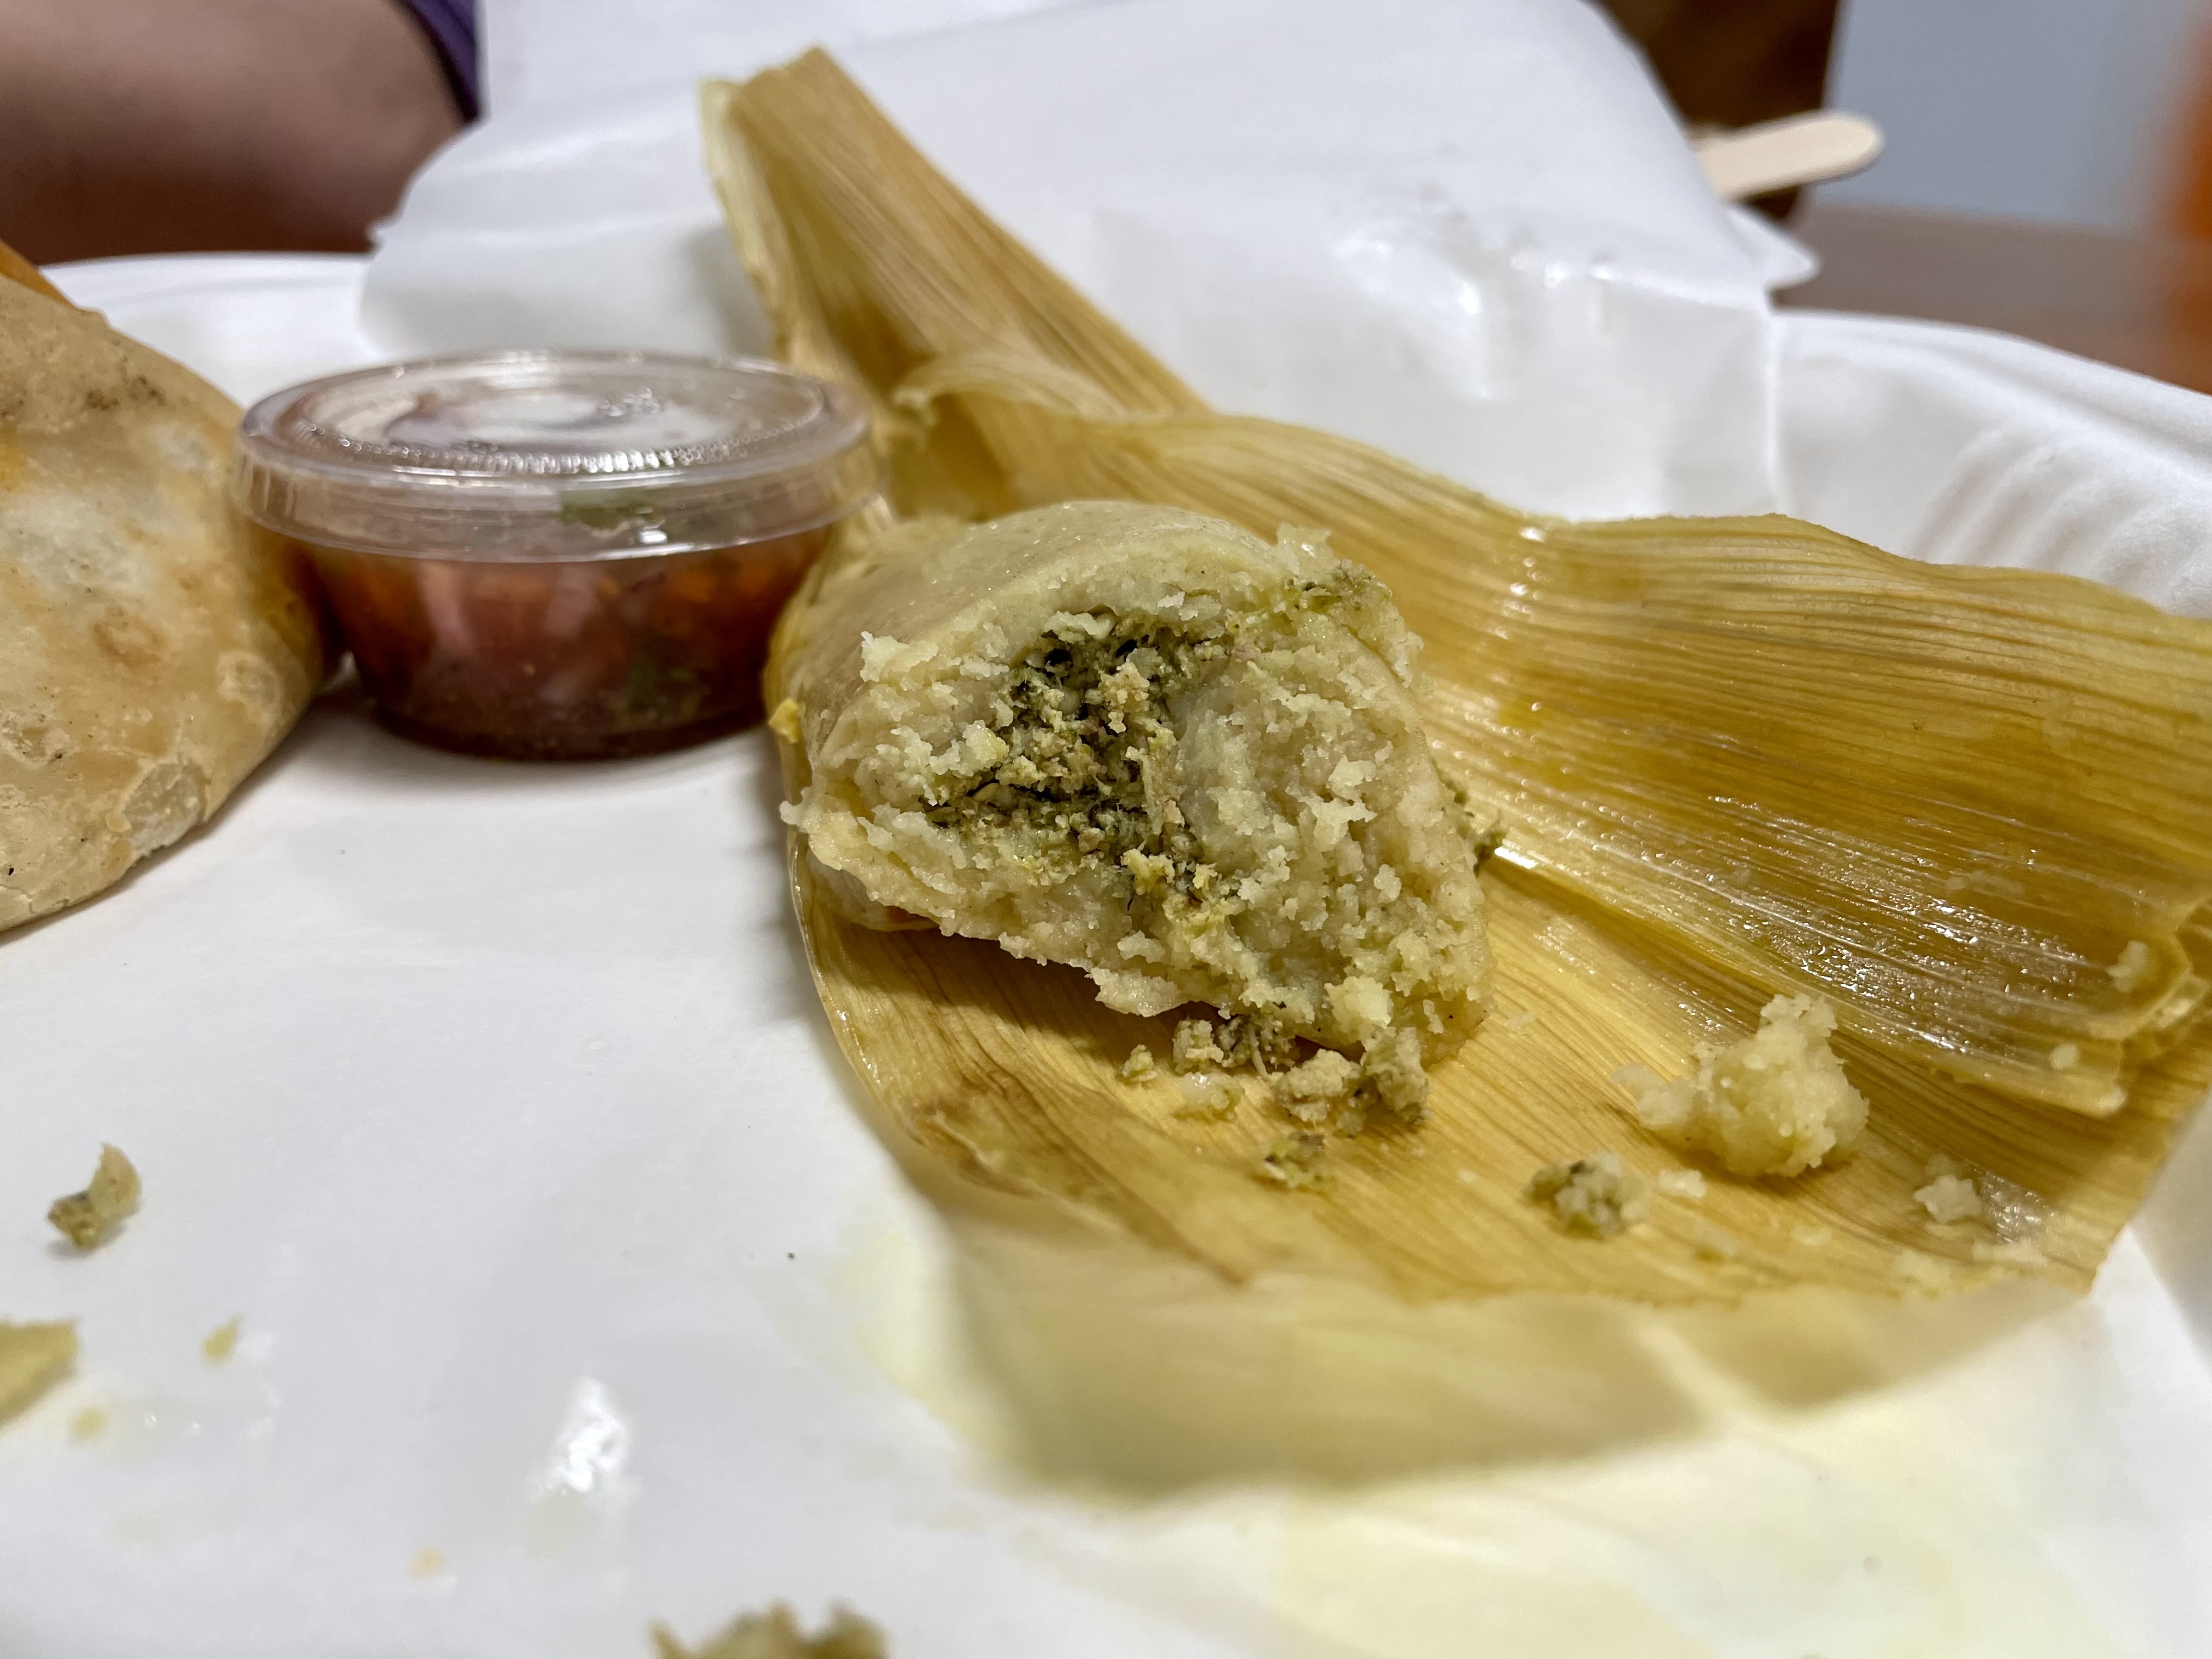 The Mexican tamale was made with corn flour, shredded chicken and prepared with mildly spicy green sauce made with tomatillos, onions, poblano chili, garlic and other spices